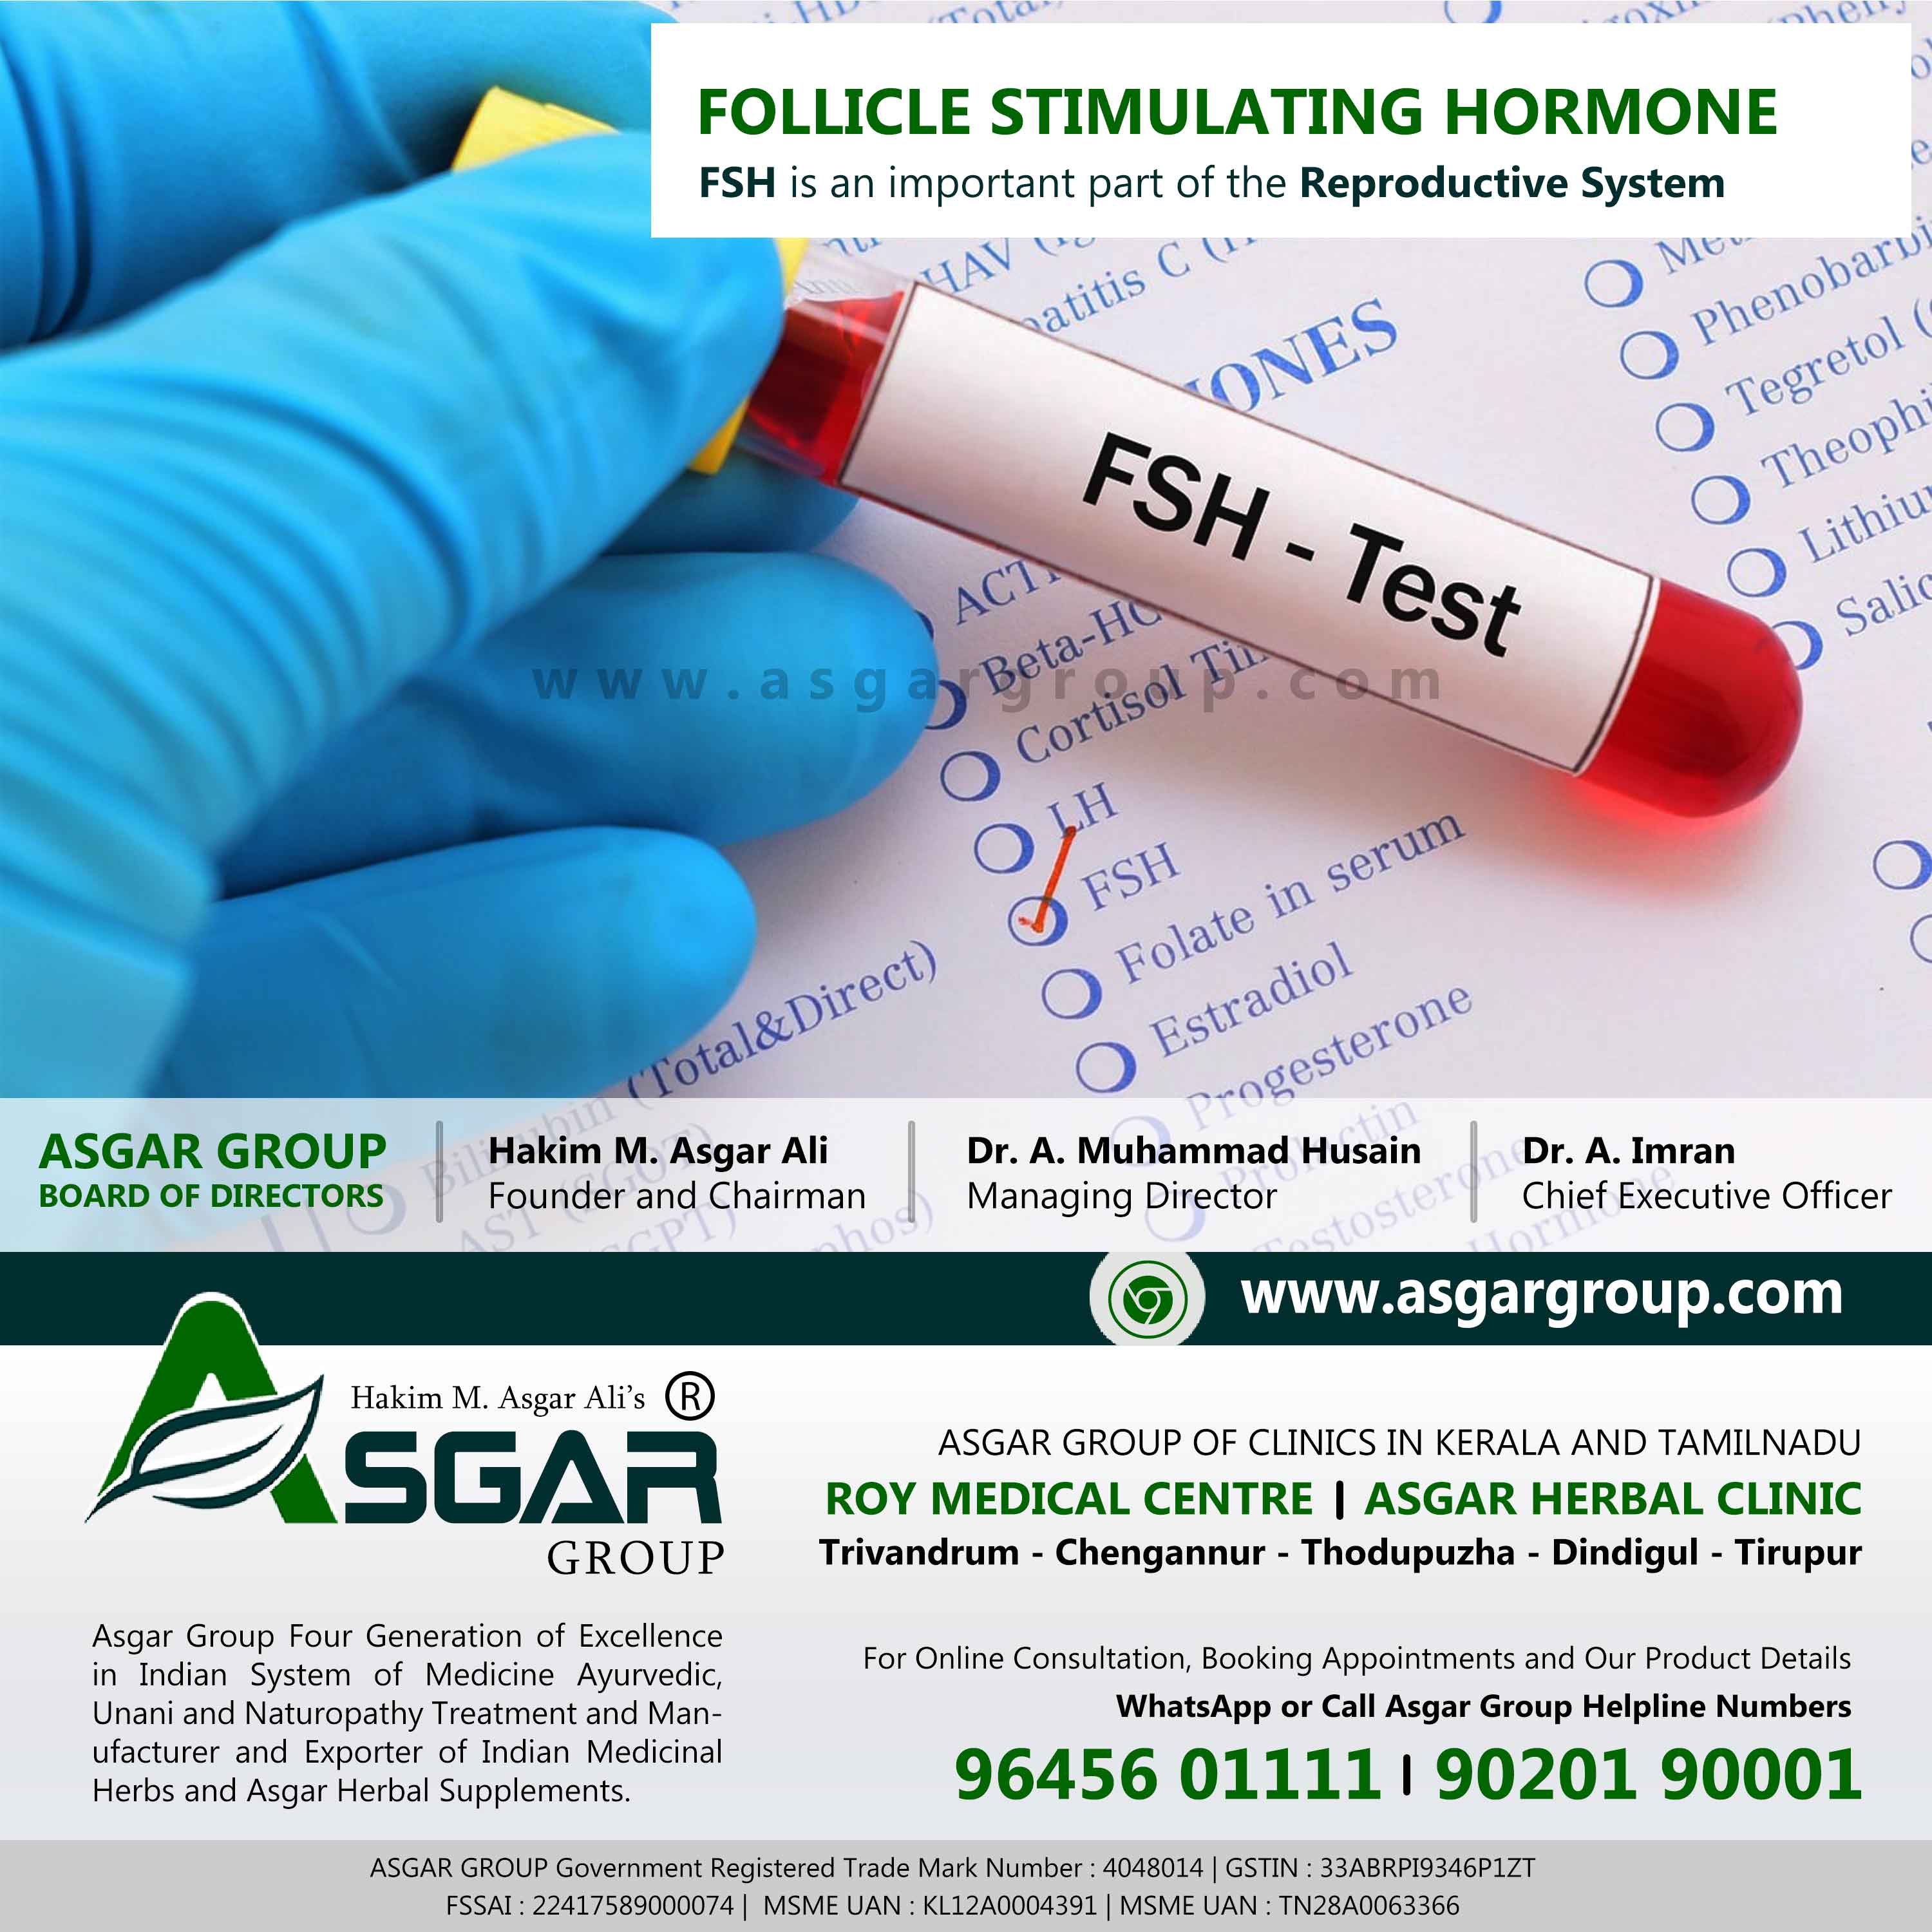 Follicle Stimulating Hormone FSH Blood Serum Test High Low abnoraml overview roy medical centre kerala asgar herbal group india